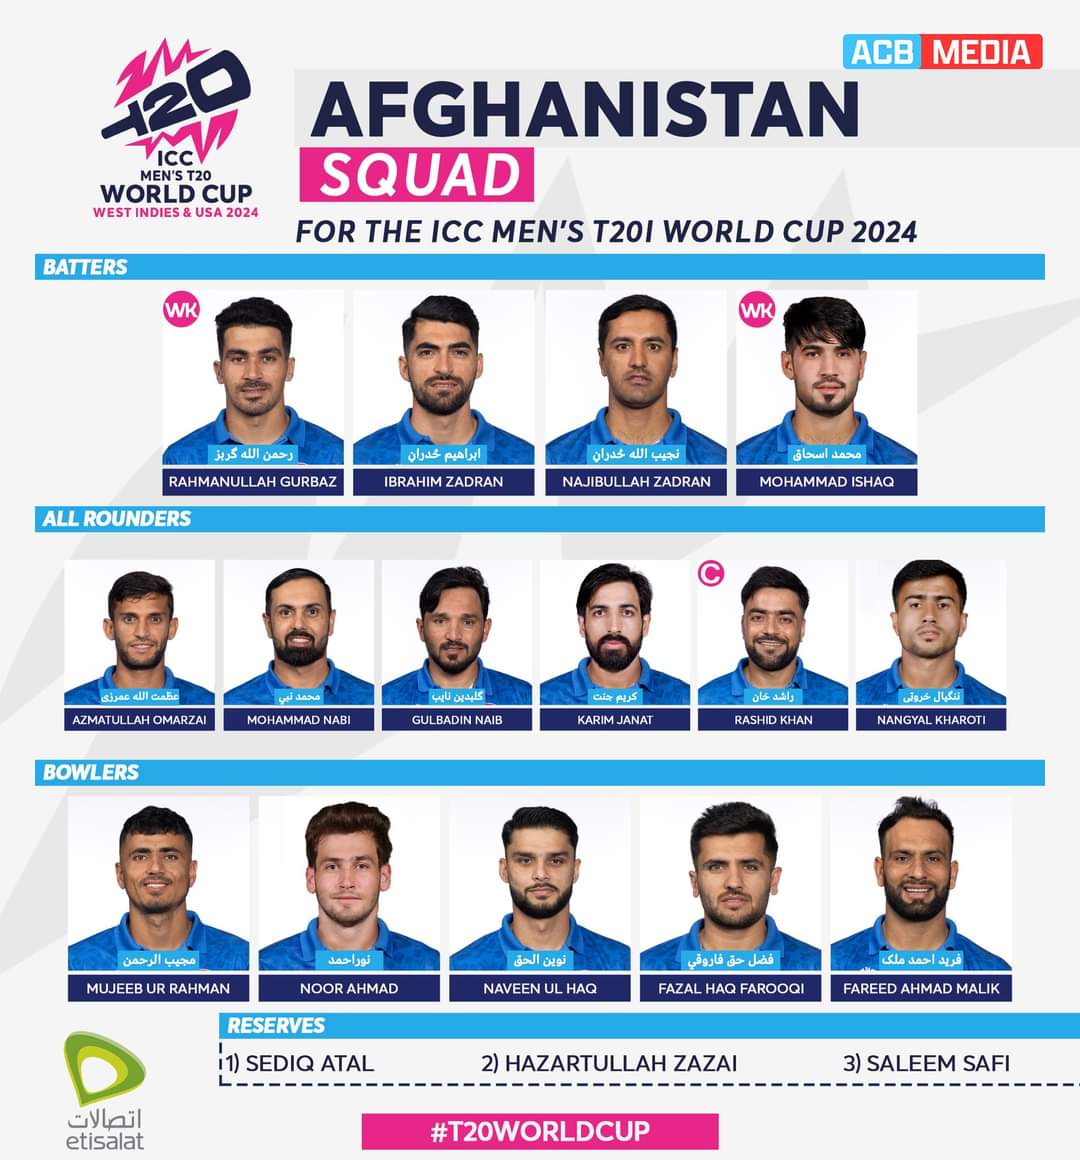 Afghanistan Squad For ICC Men's T20 World Cup 2024.🇦🇫🏏🏆 Rashid Khan lead the 15 members Squad.❤🇦🇫 Sediq Atal,Hazartullah Zazai and Saleem Safi into Traveling Reserves.✈️🇦🇫 #T20WorldCup24